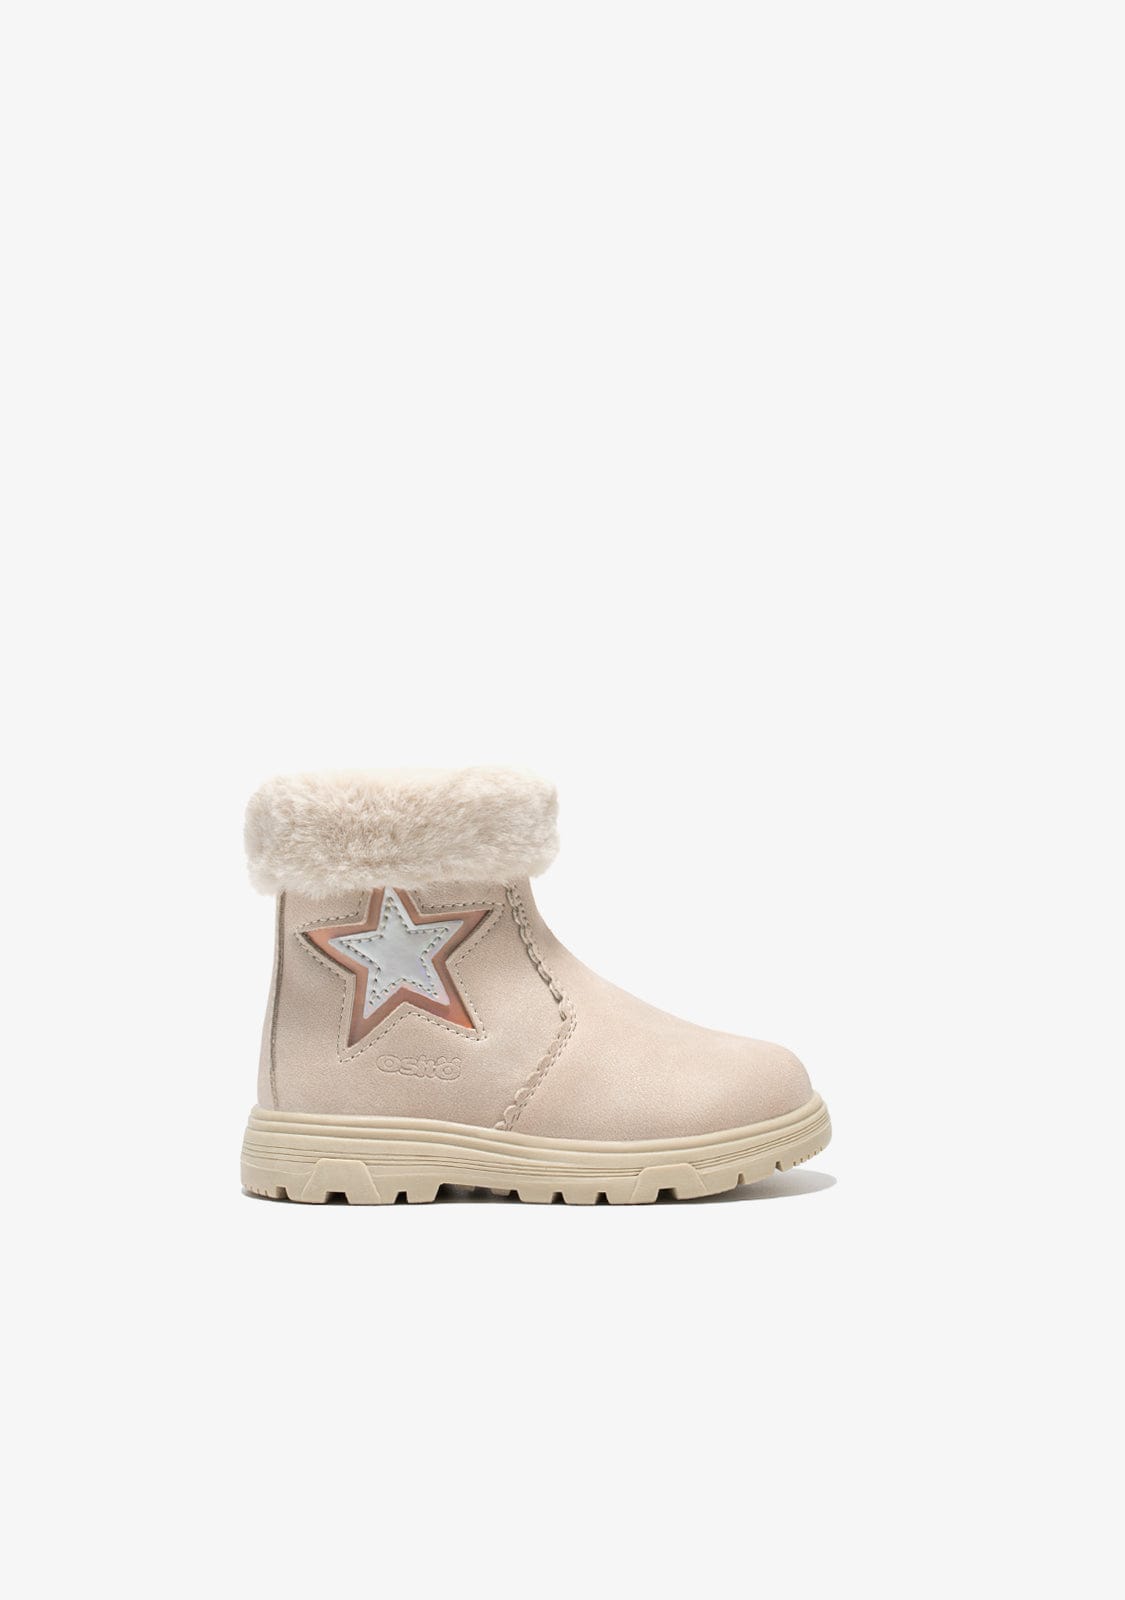 OSITO Shoes Baby's Beige Star Fur Ankle Boots